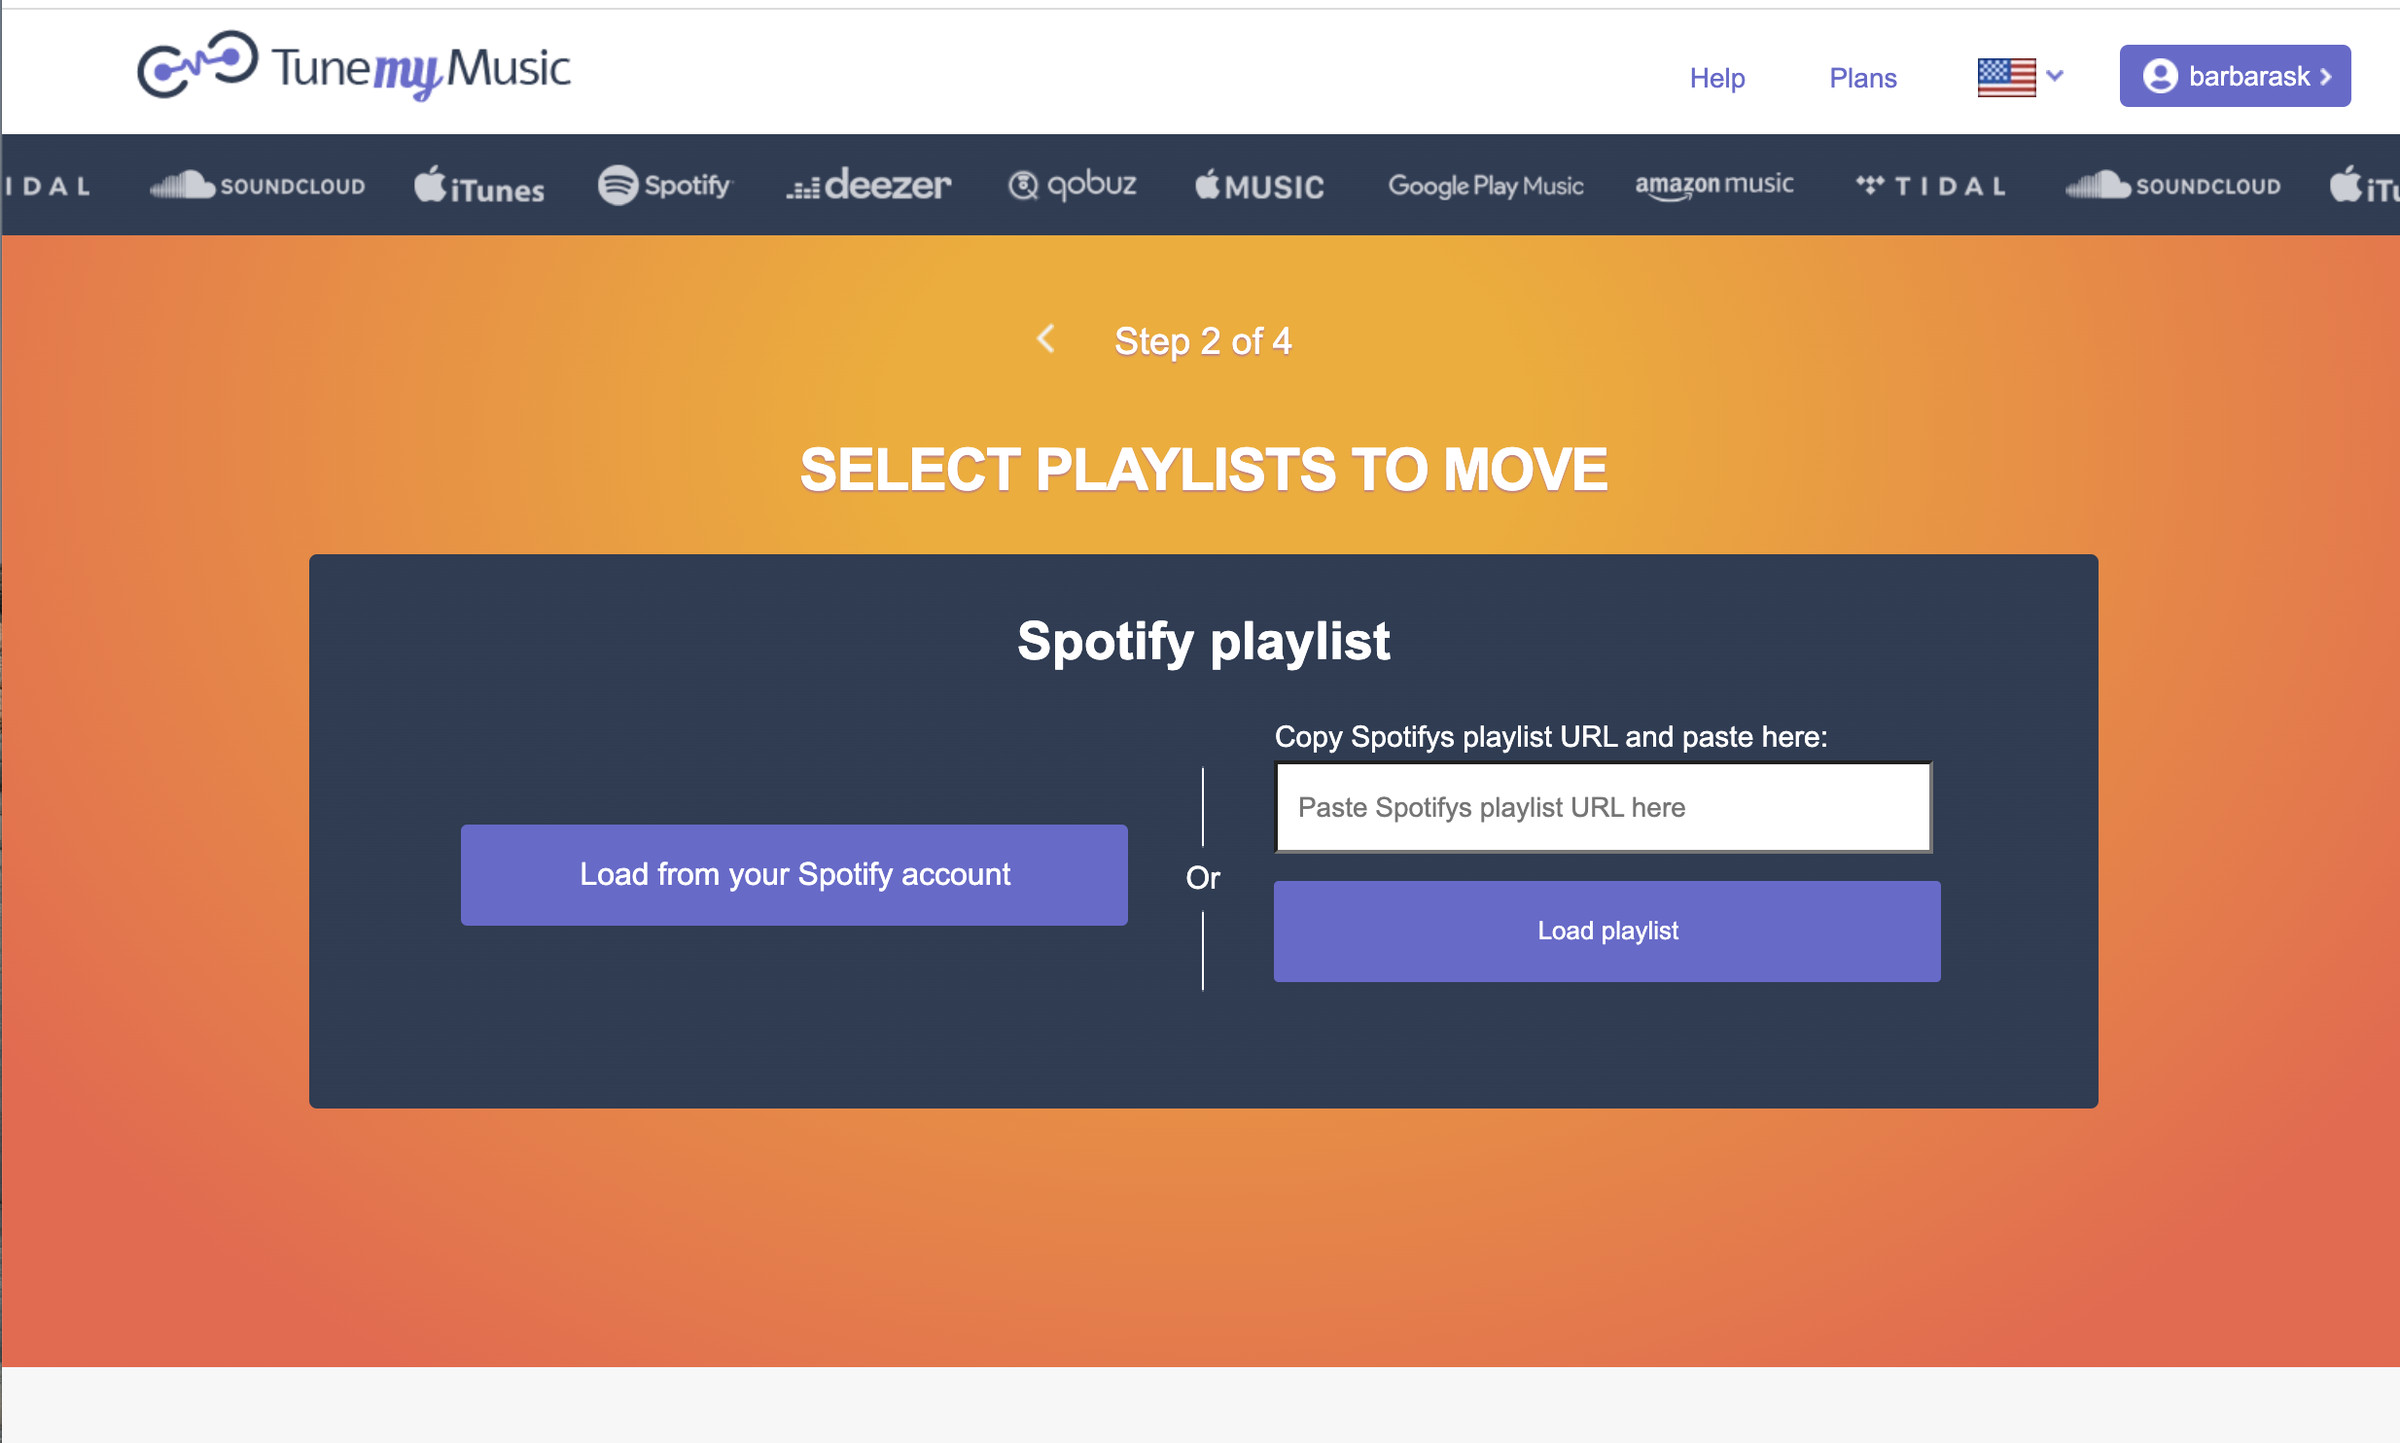 Load your playlist directly from the service, or drop in the URL.